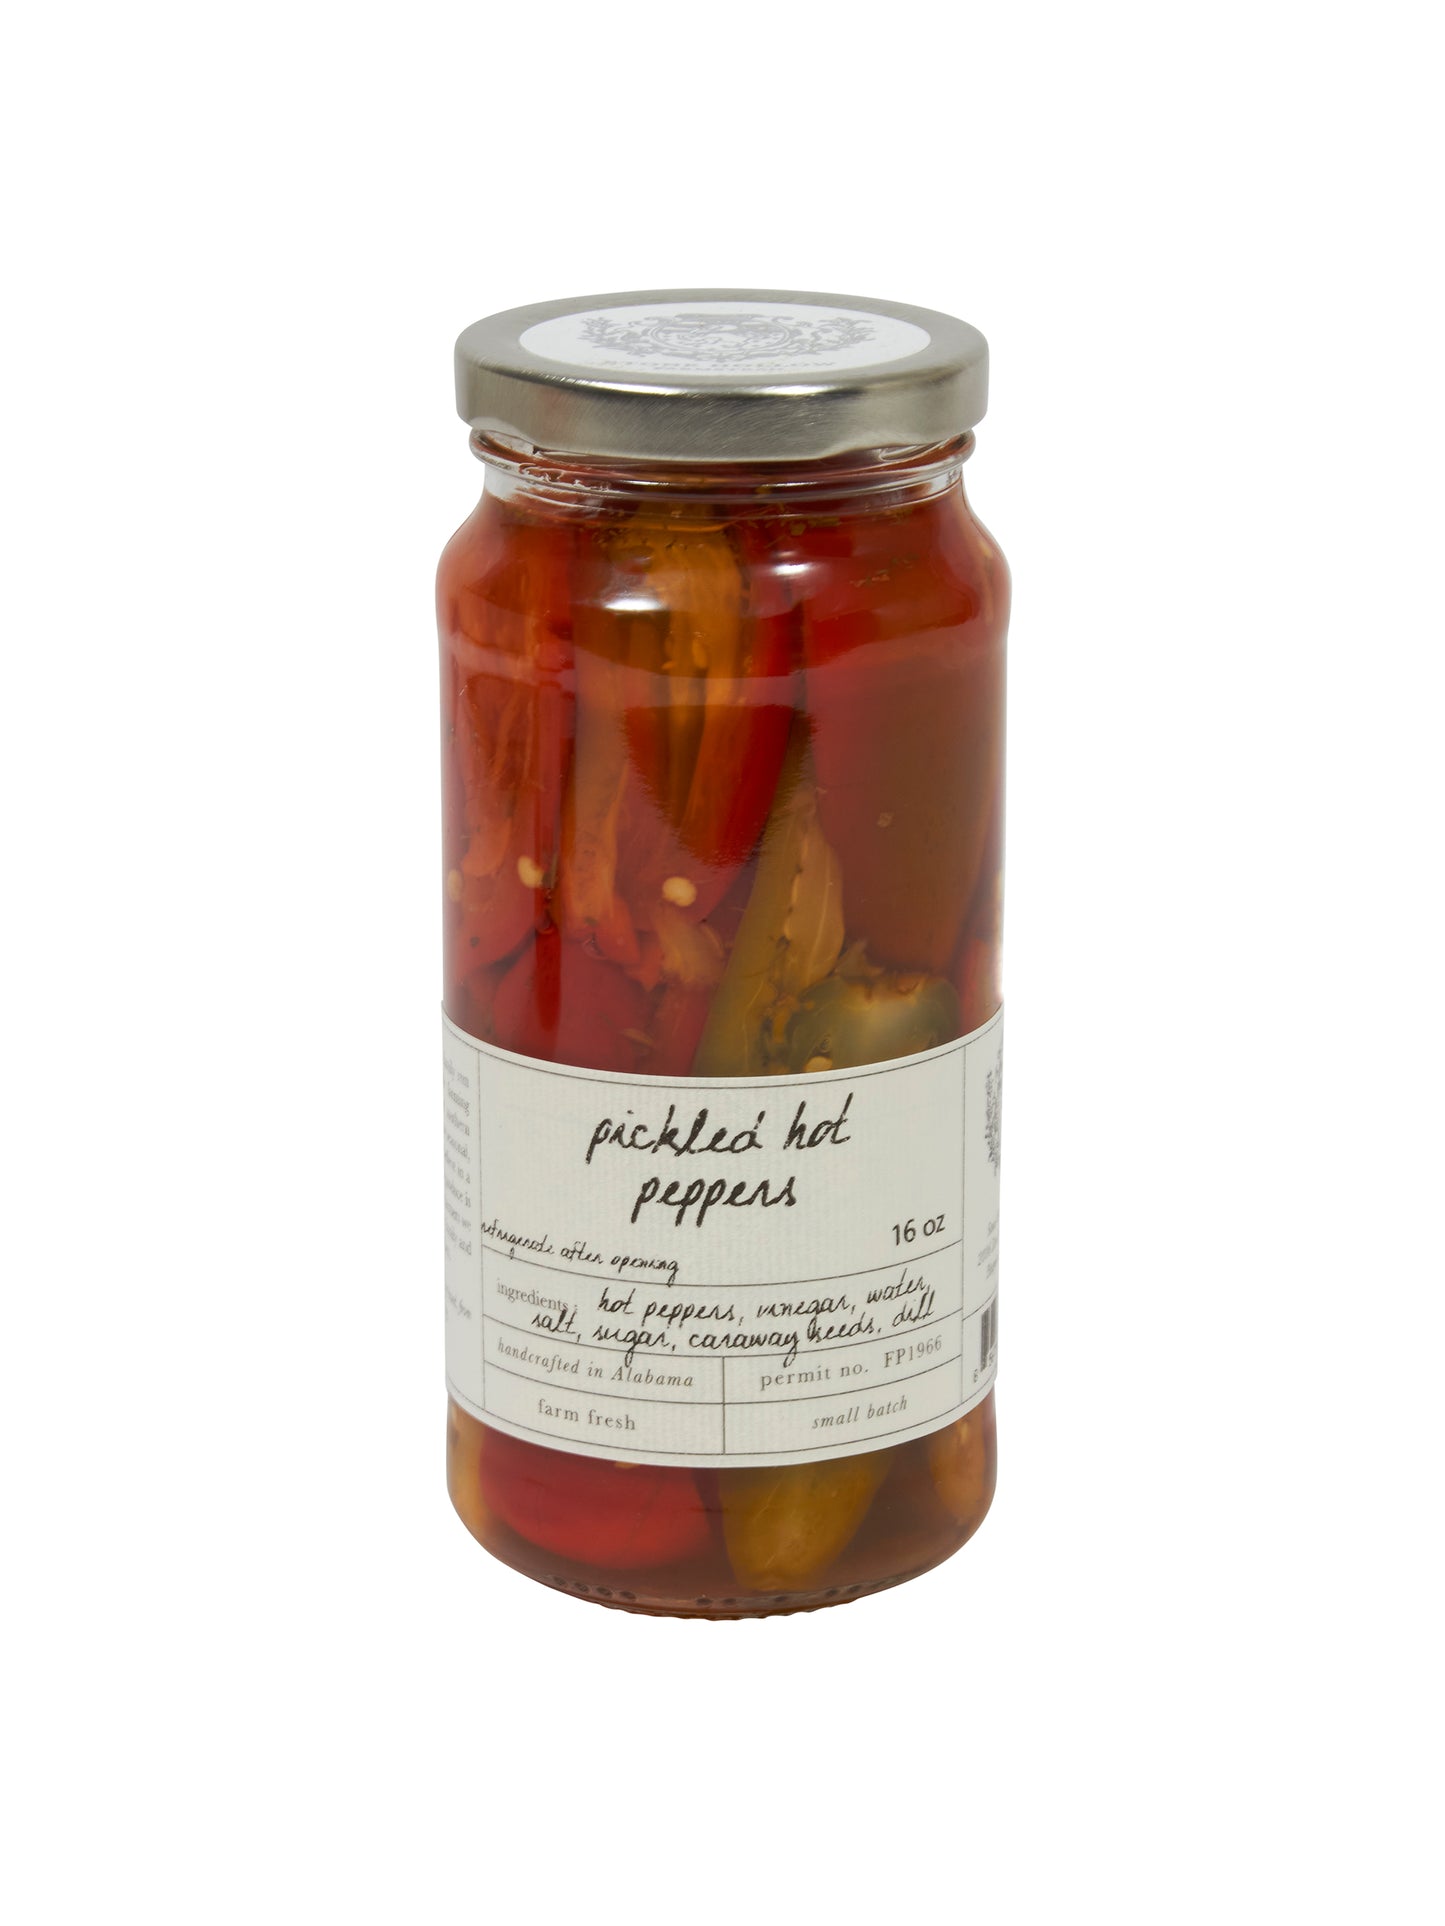 Stone Hollow Farmstead Pickled Seasonal Hot Peppers Weston Table